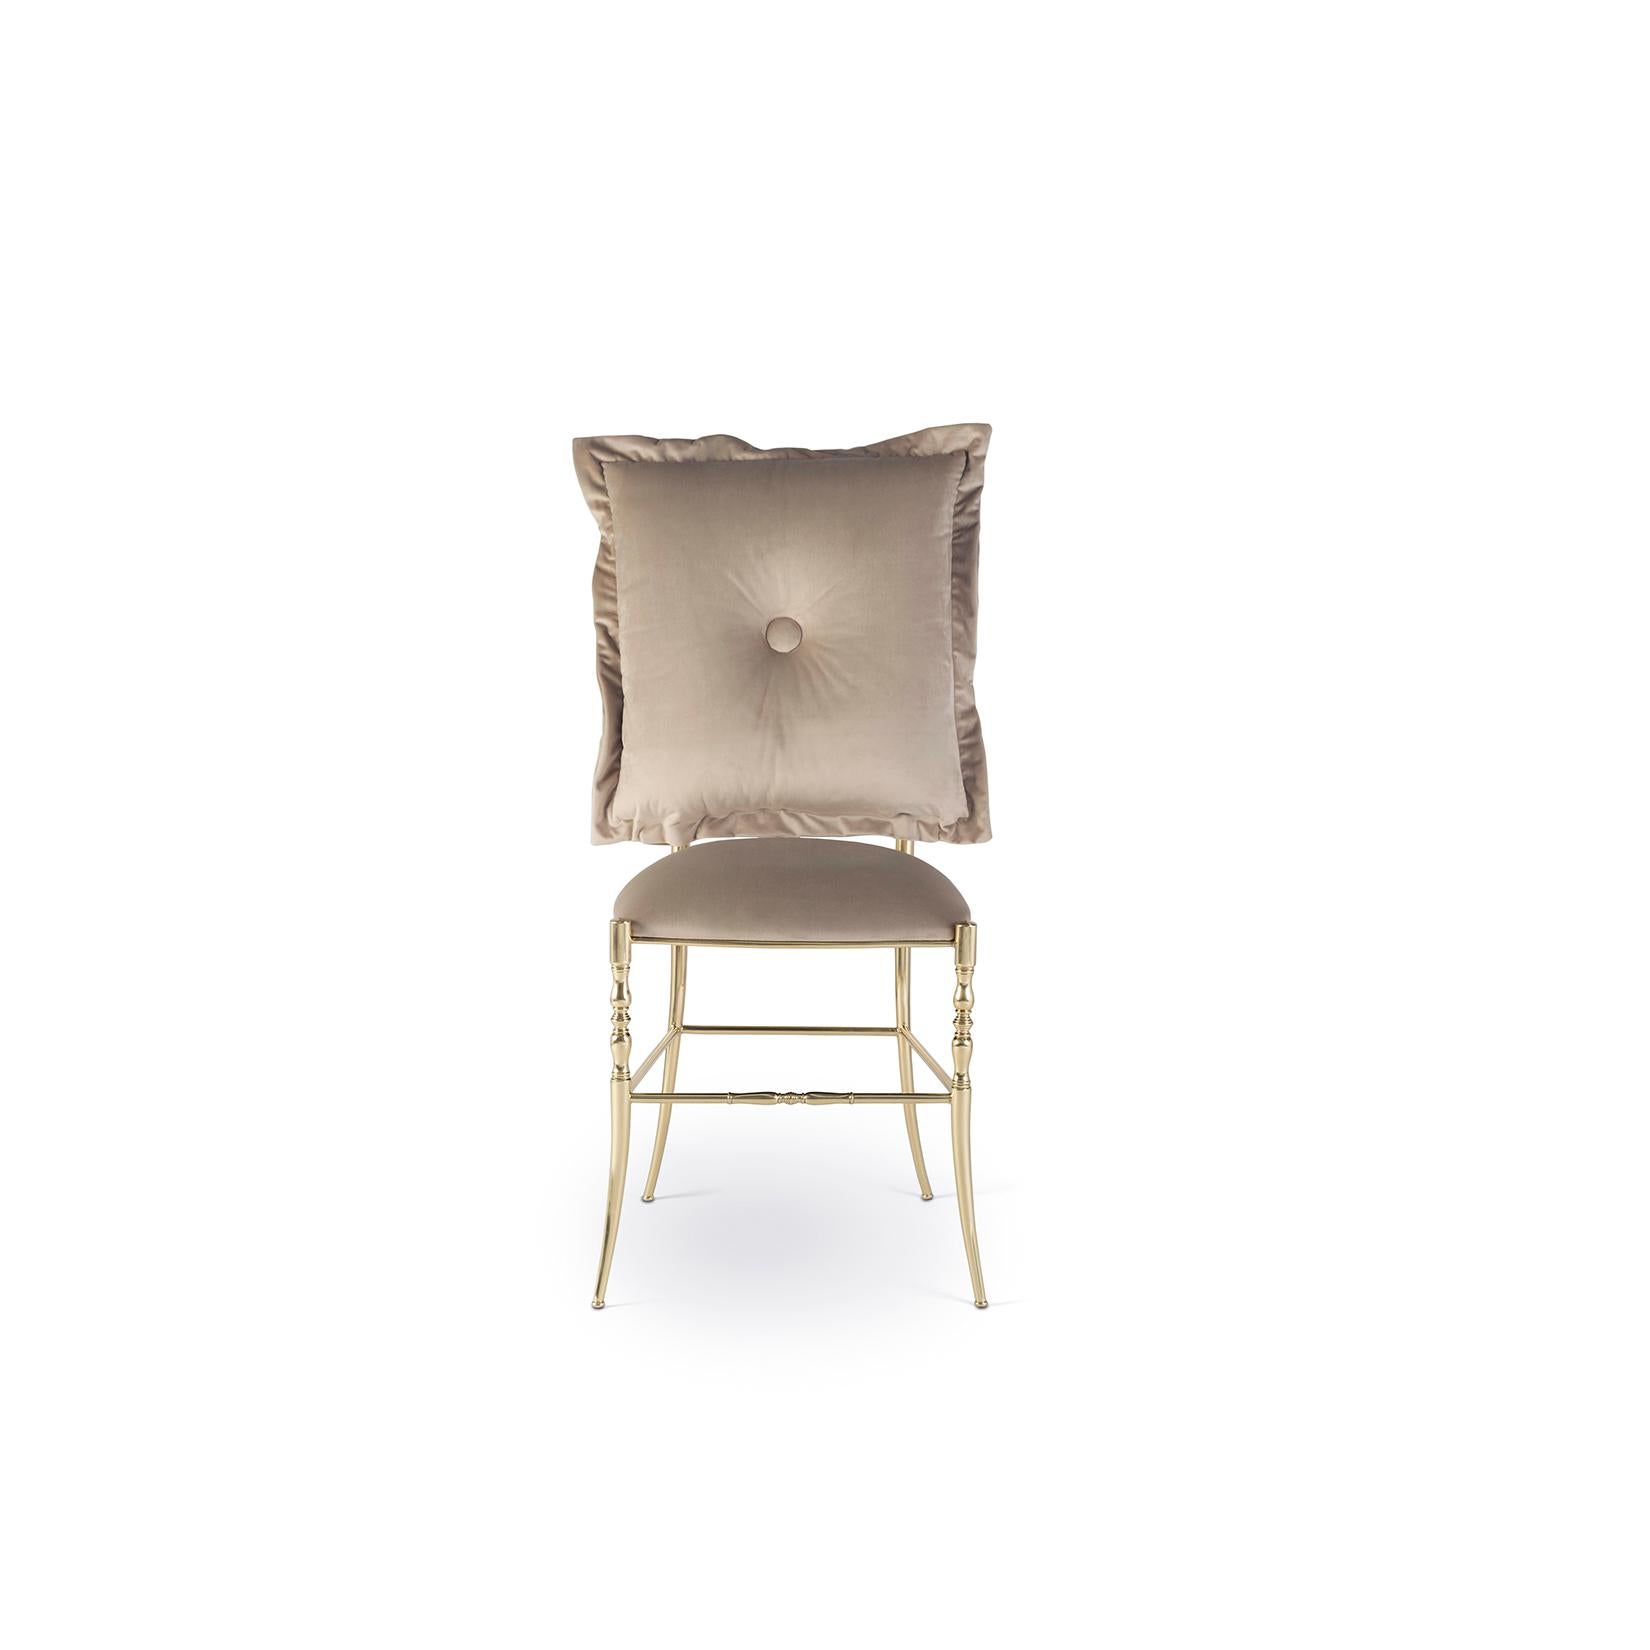 Inspiration:  
The Chiavarina was created in 1807 by a carpenter from Chiavari, Italy. Giuseppe Gaetano Descalzi reformulated some of the French Empire style chairs by simplifying the decorative elements and by emphasizing the structural features.